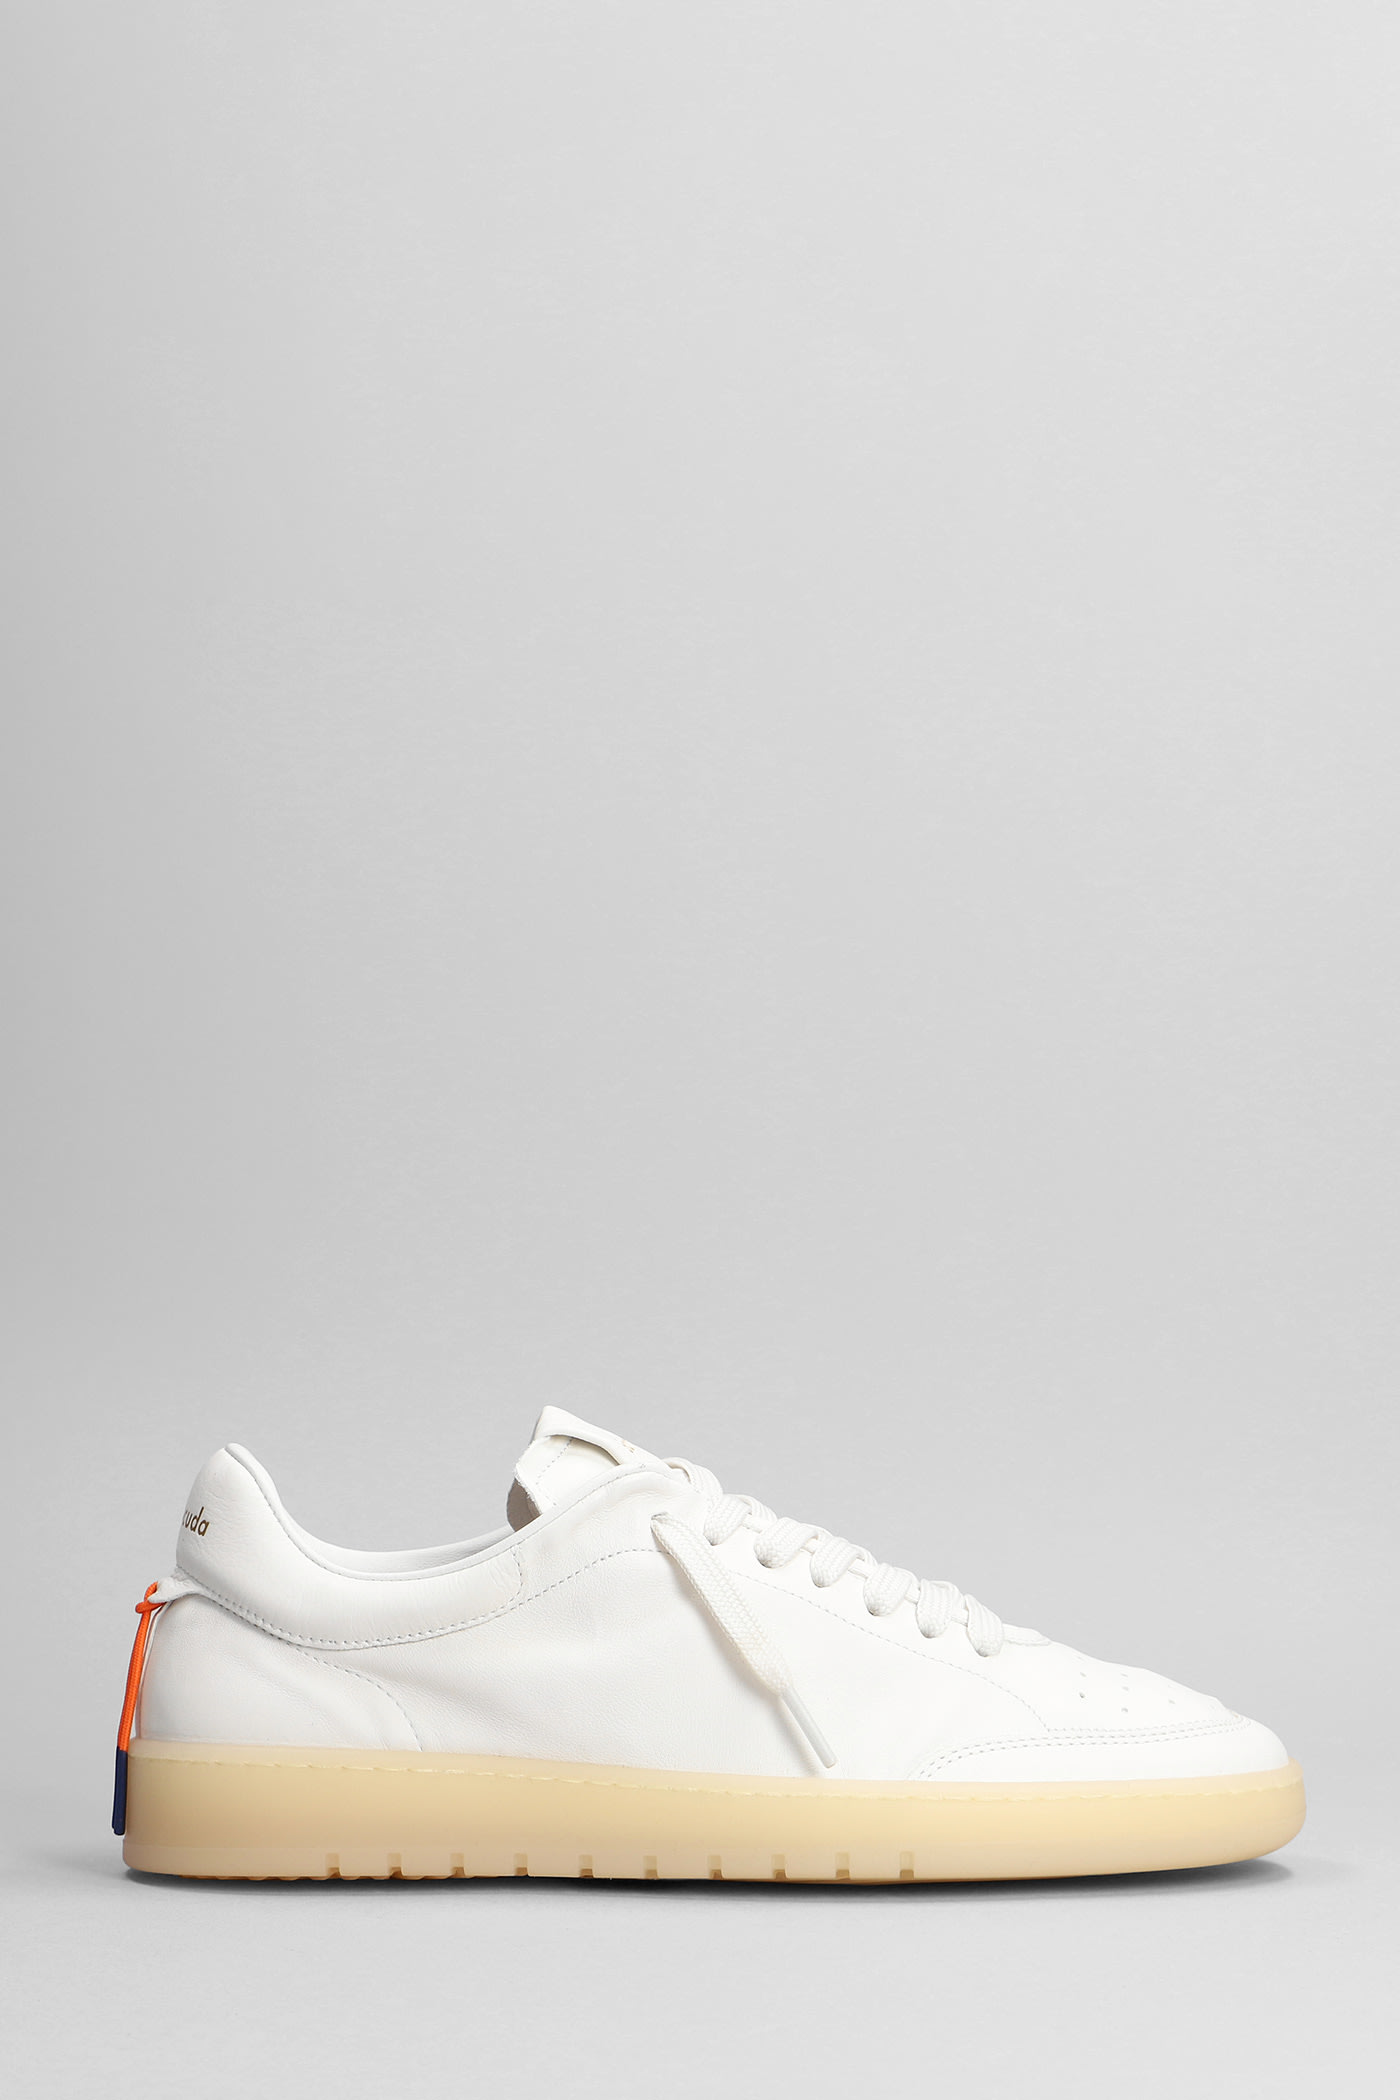 BARRACUDA SNEAKERS IN WHITE LEATHER